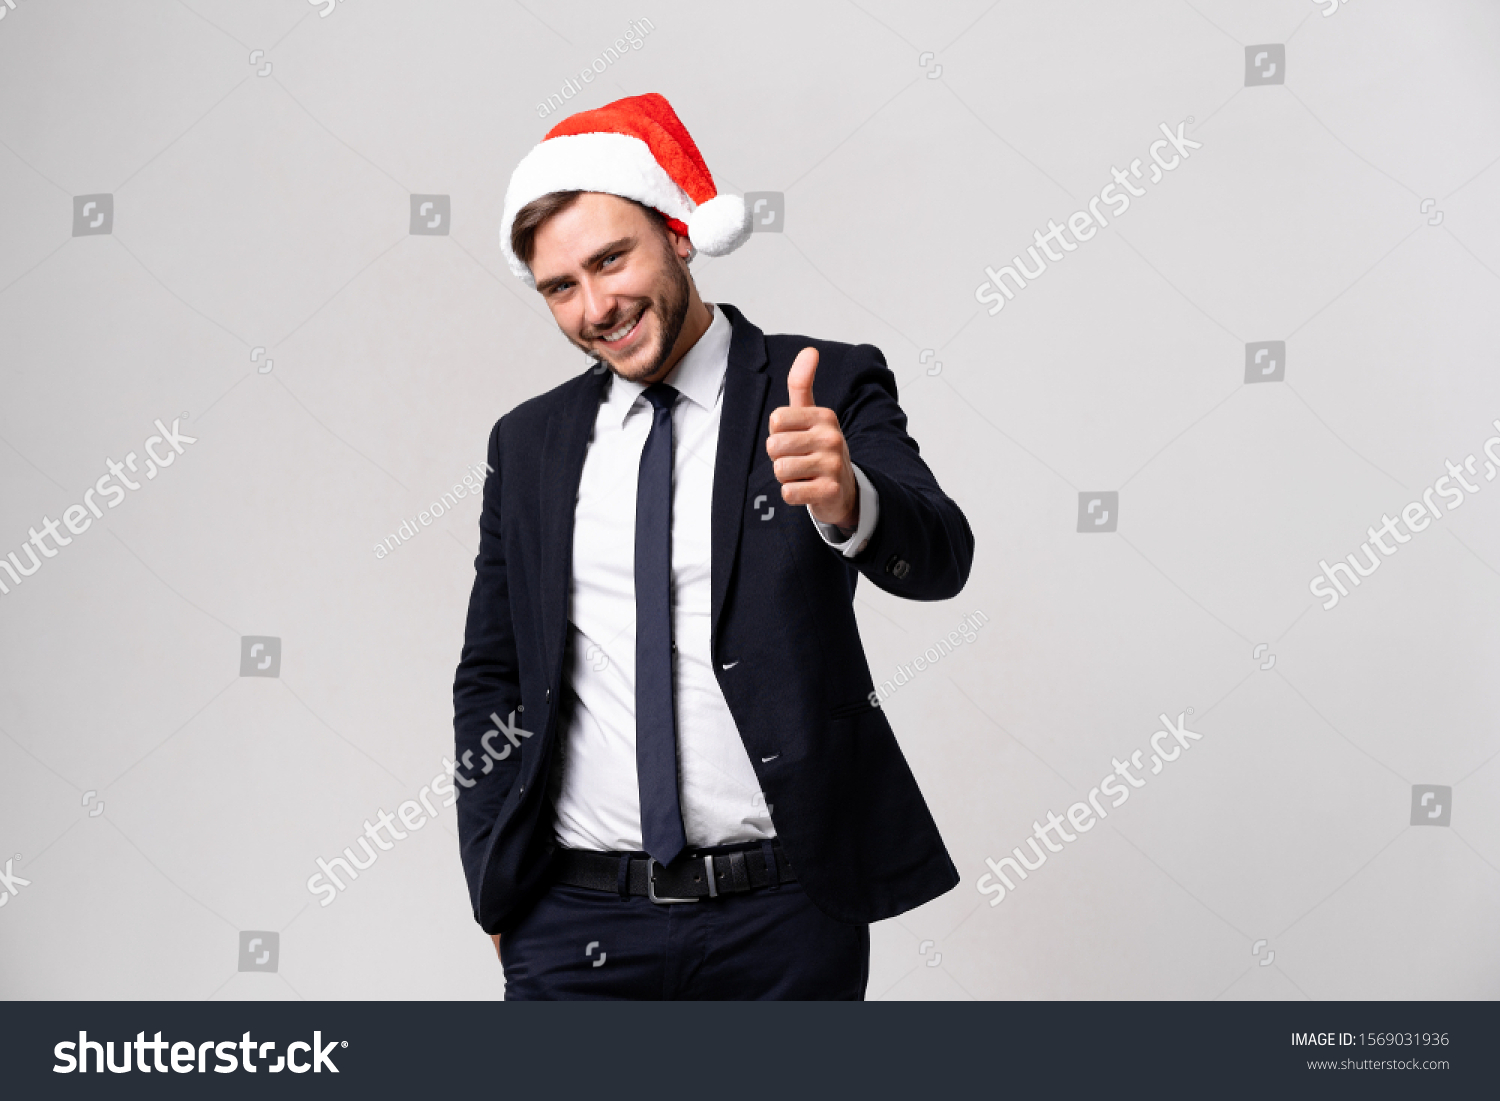 Young handsome caucasian guy in business suit and Santa hats on white background in studio smilie and showing thumbs up two hands. Close up portrait business person with Christmas mood Holiday banner #1569031936